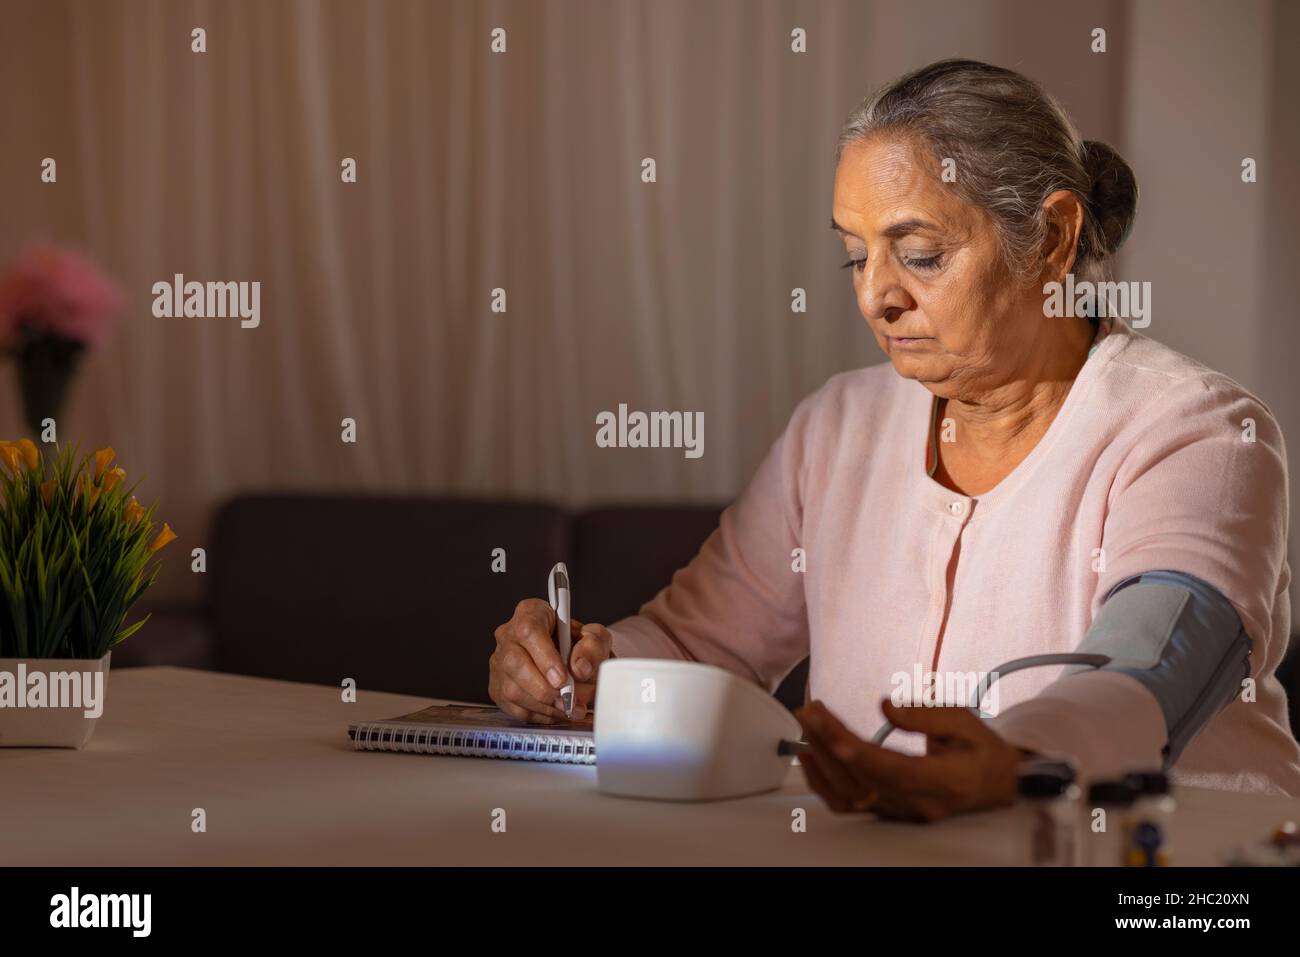 Old woman writing down her blood pressure result Stock Photo